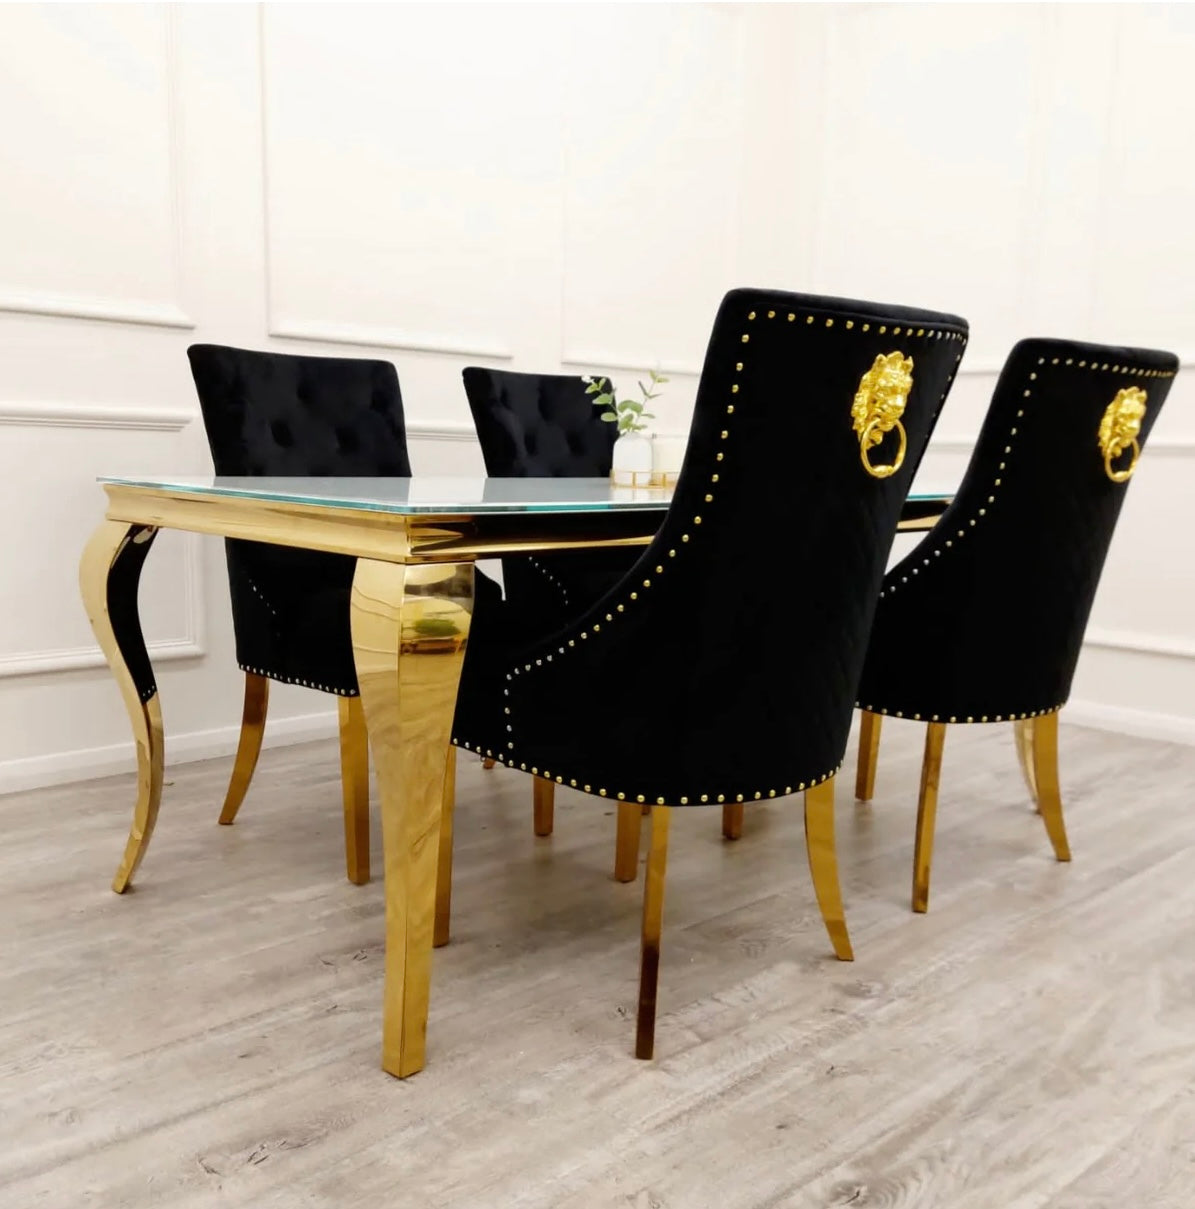 Louis gold white glass dining table with black Bentley chairs